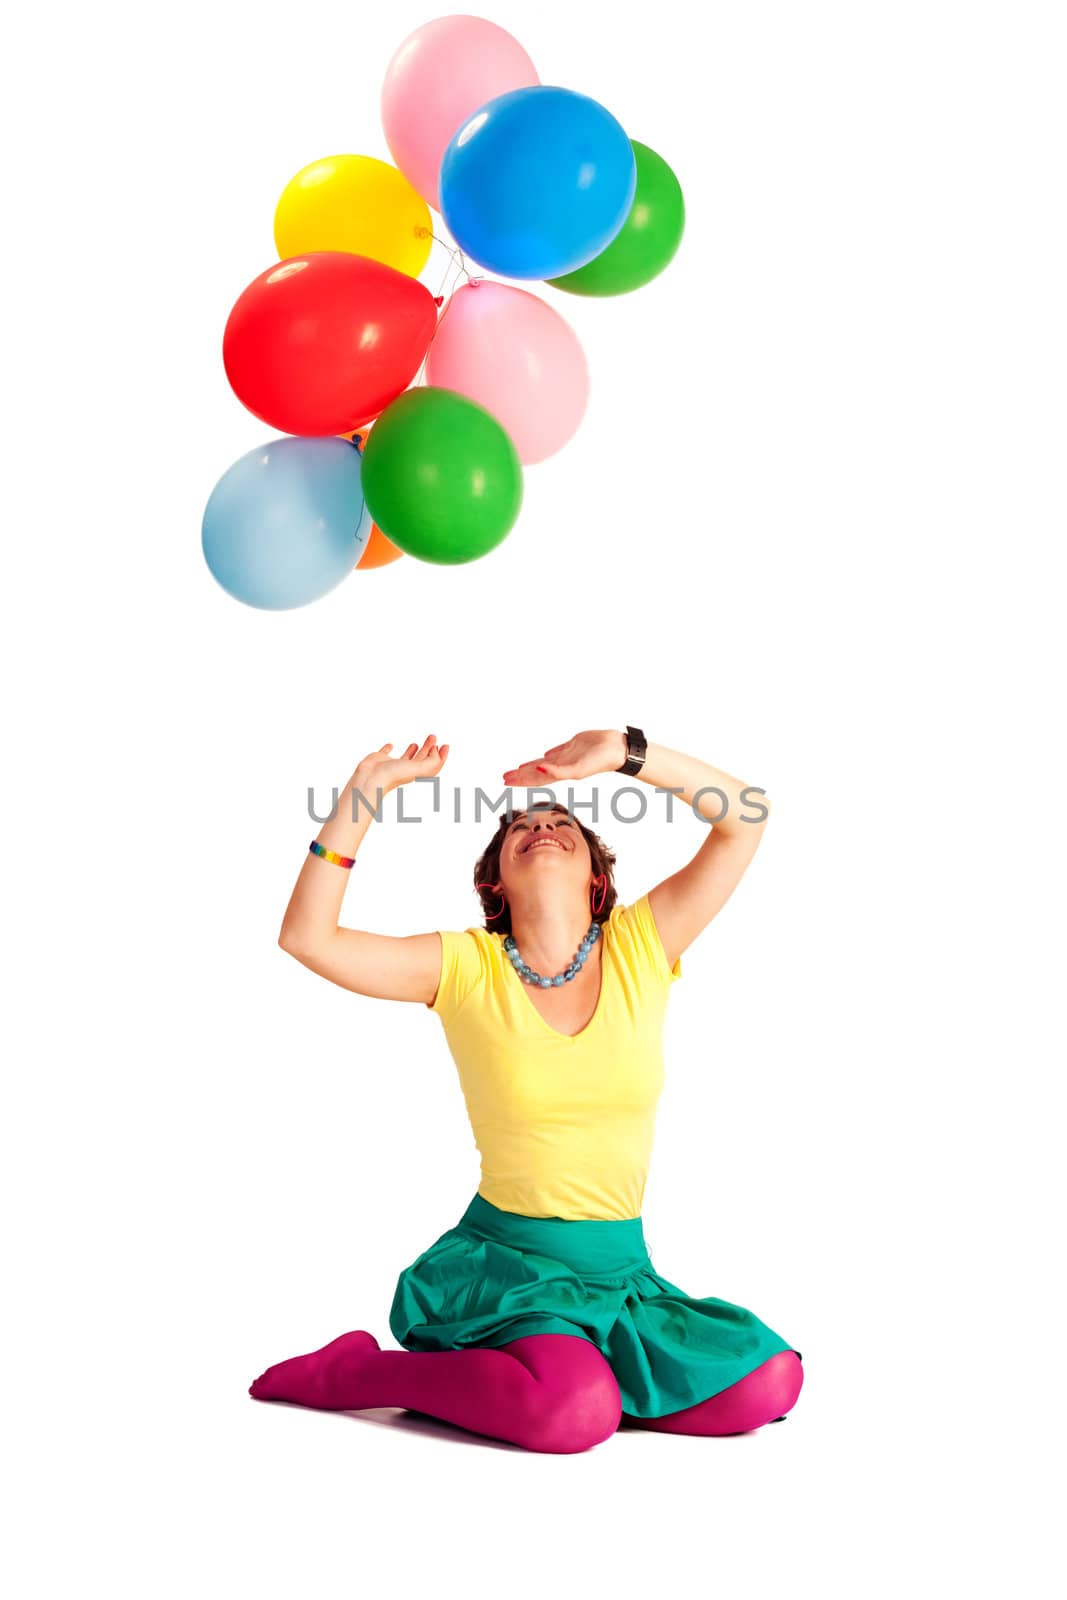 people series: young girl play with balloons